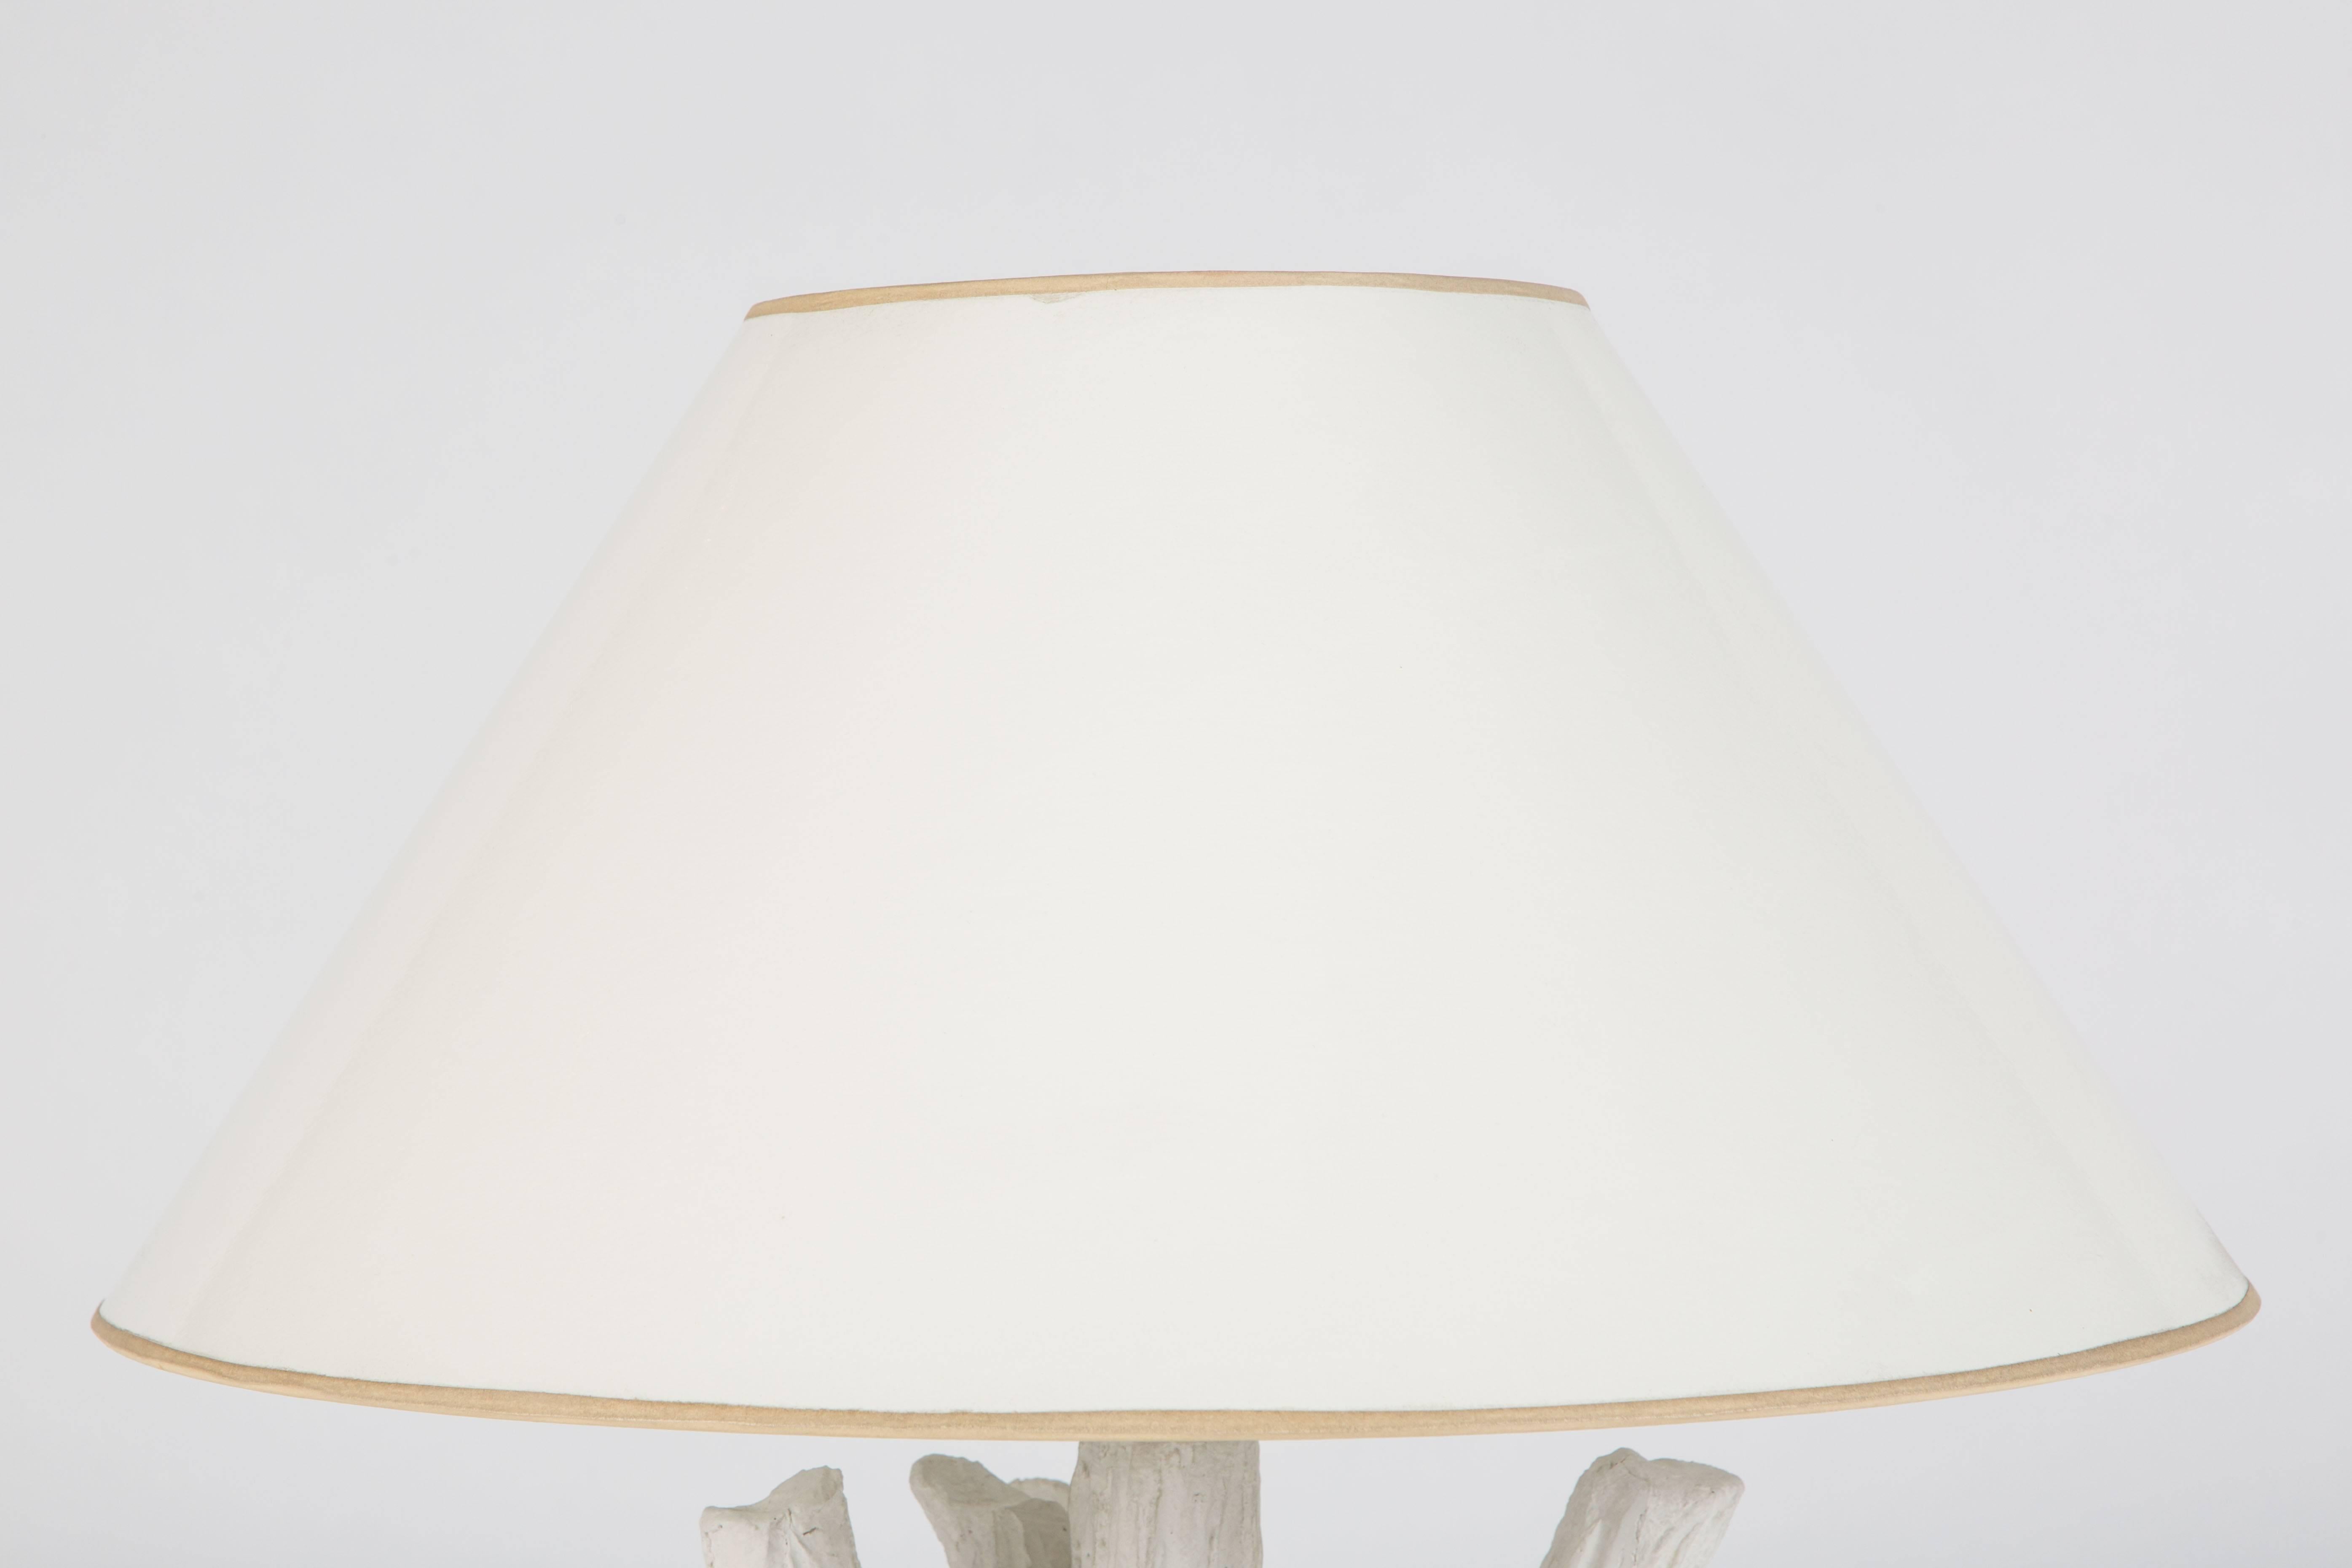 Rare table lamp from the late iconic San Francisco designer John Dickinson (1920-1982). Cast white Plaster of Paris, circa 1970s. 

Measures: 31 inches high; the base 10 1/2 inches wide; the shade 23 inches in diameter. All original condition,